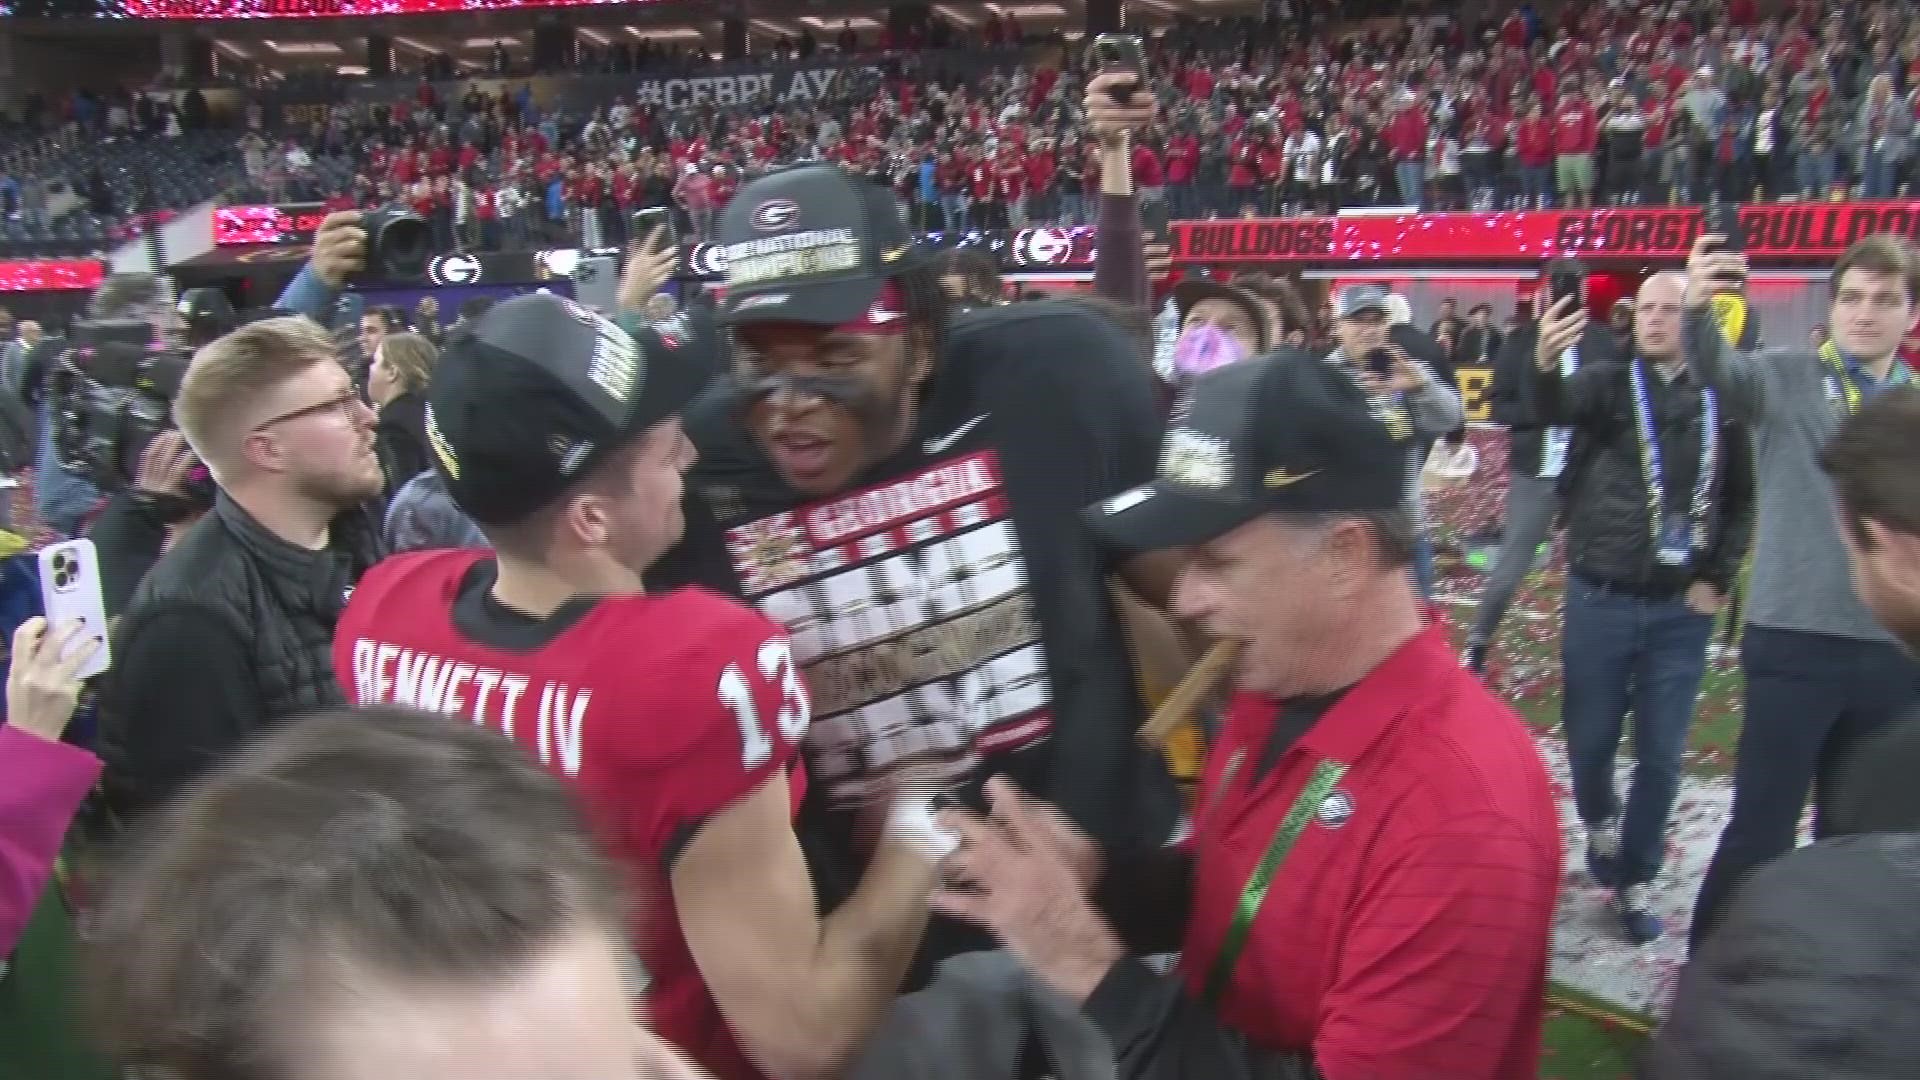 Sights and sounds from the field following the Georgia Bulldogs' win in the 2023 College Football Playoff National Championship.